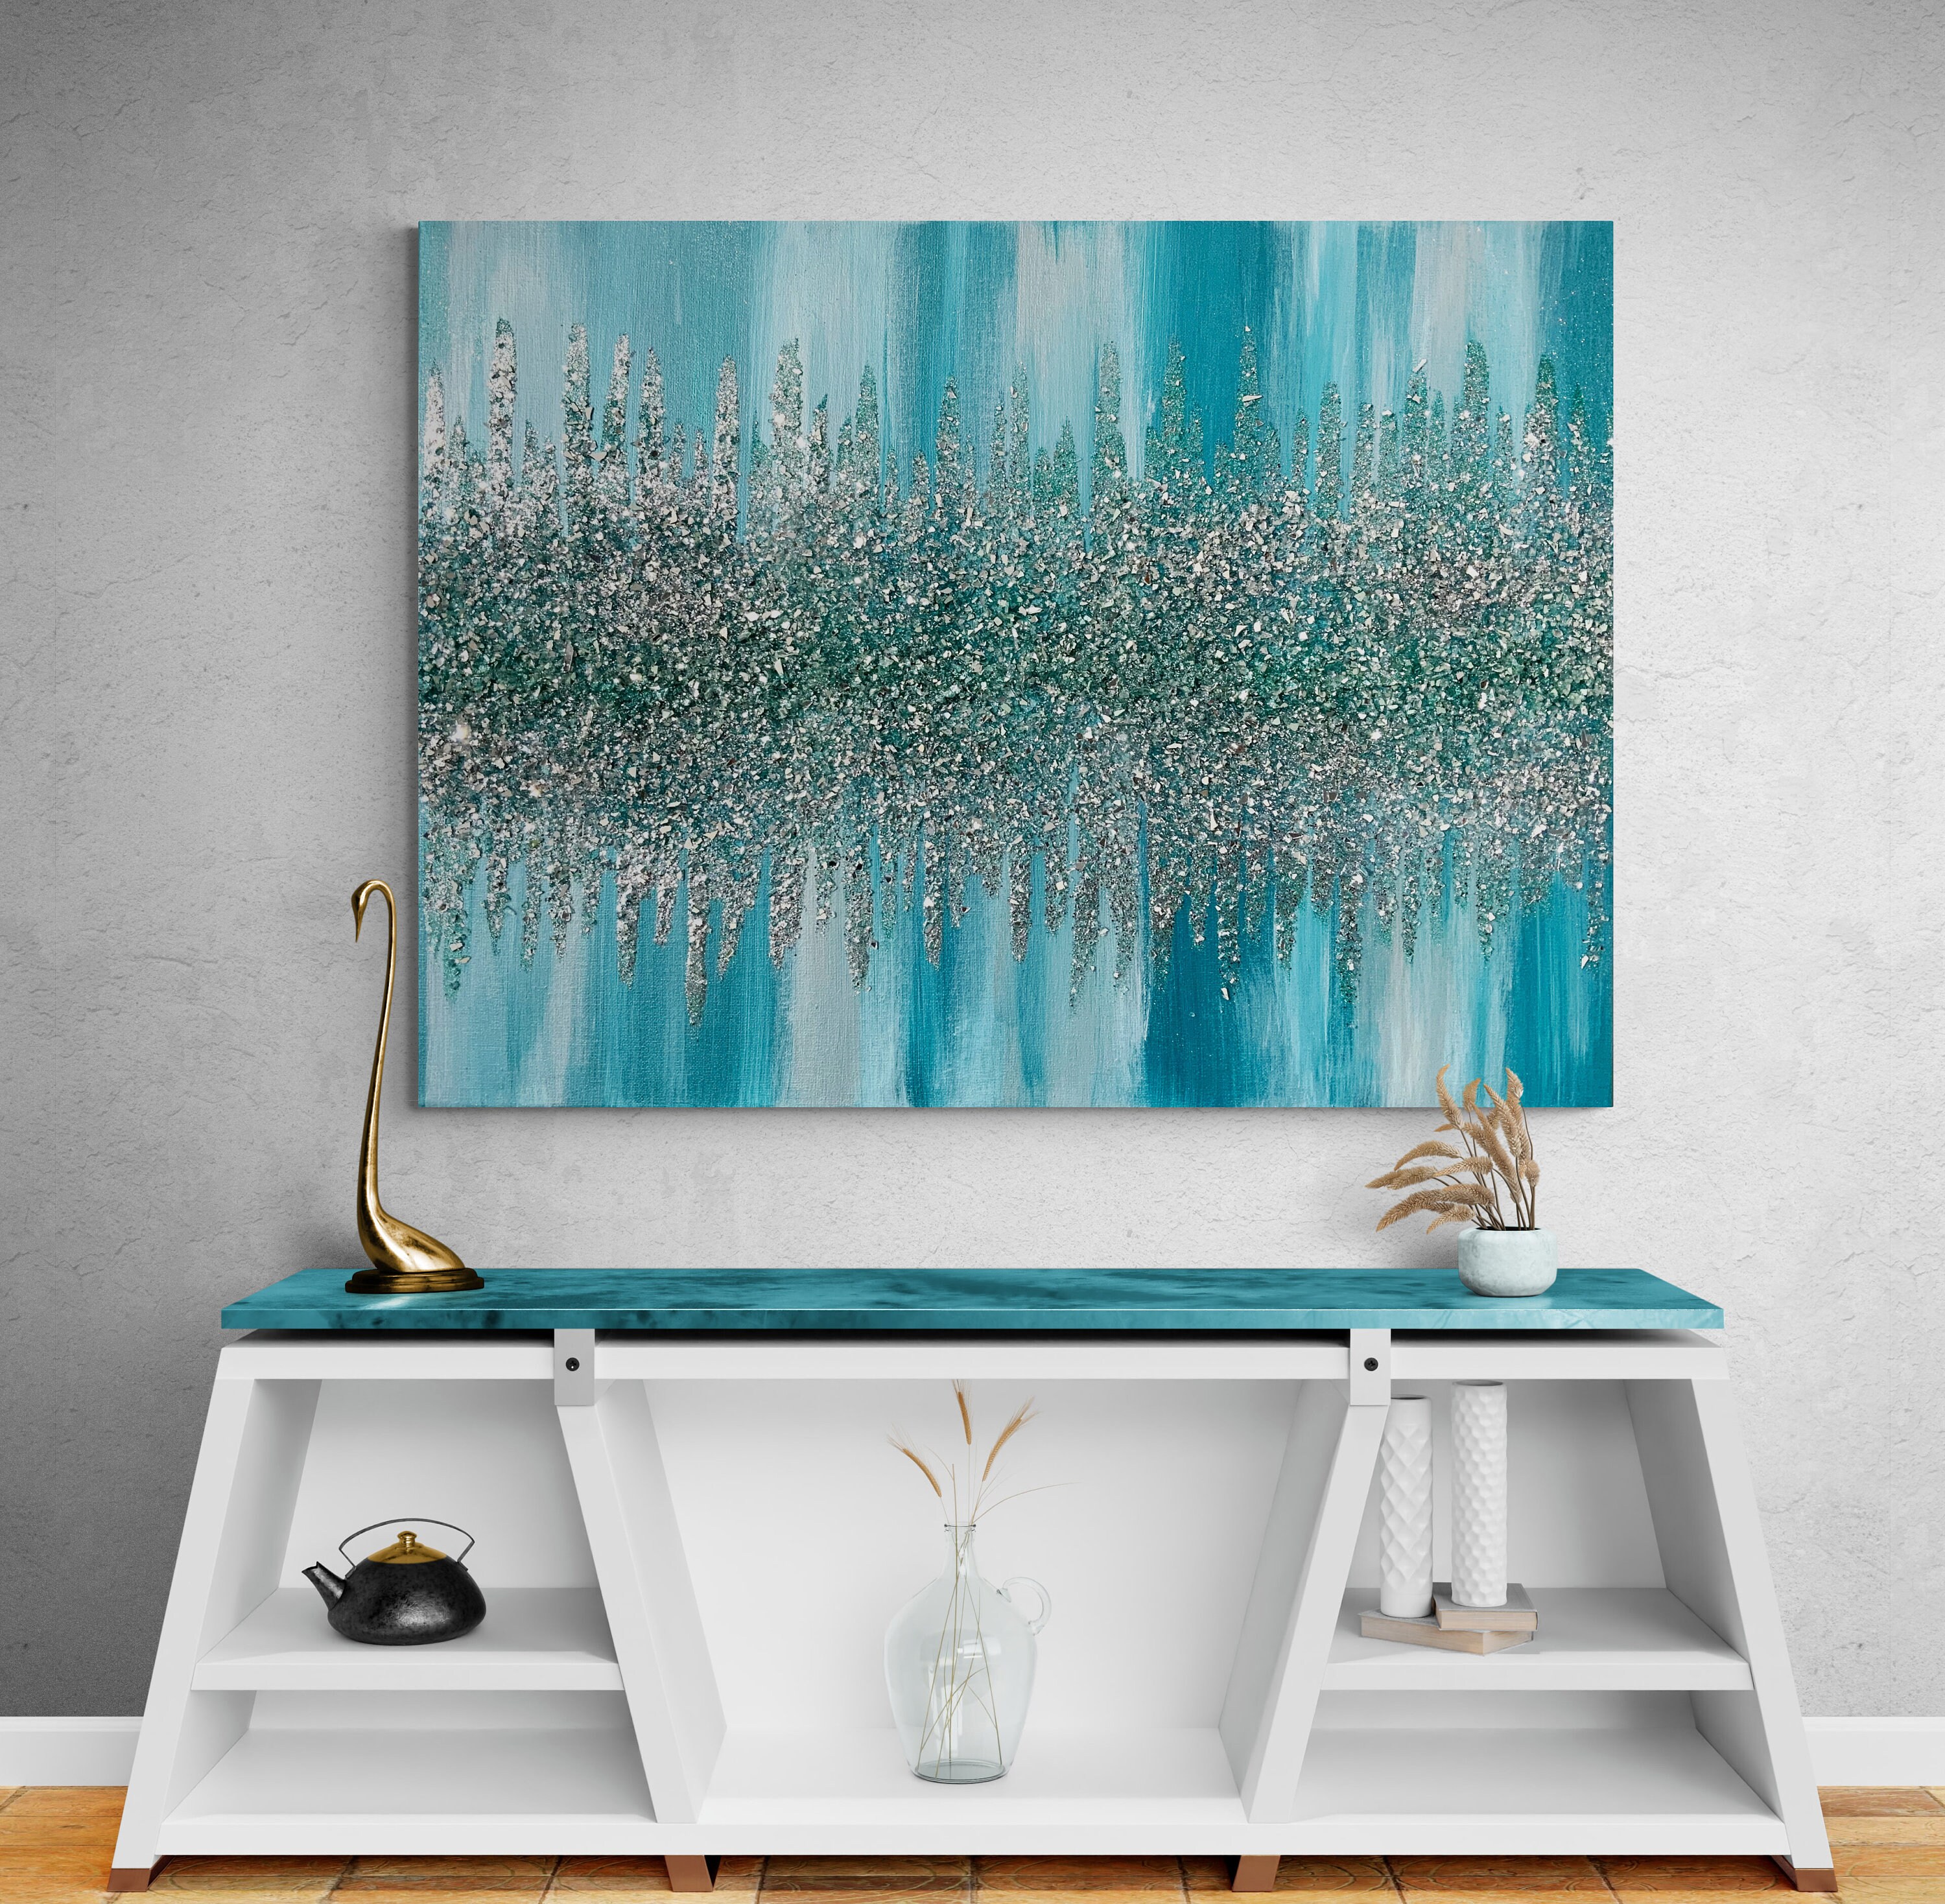 Bling Canvas Painting with Crushed Glass and Glitter / Turquoise